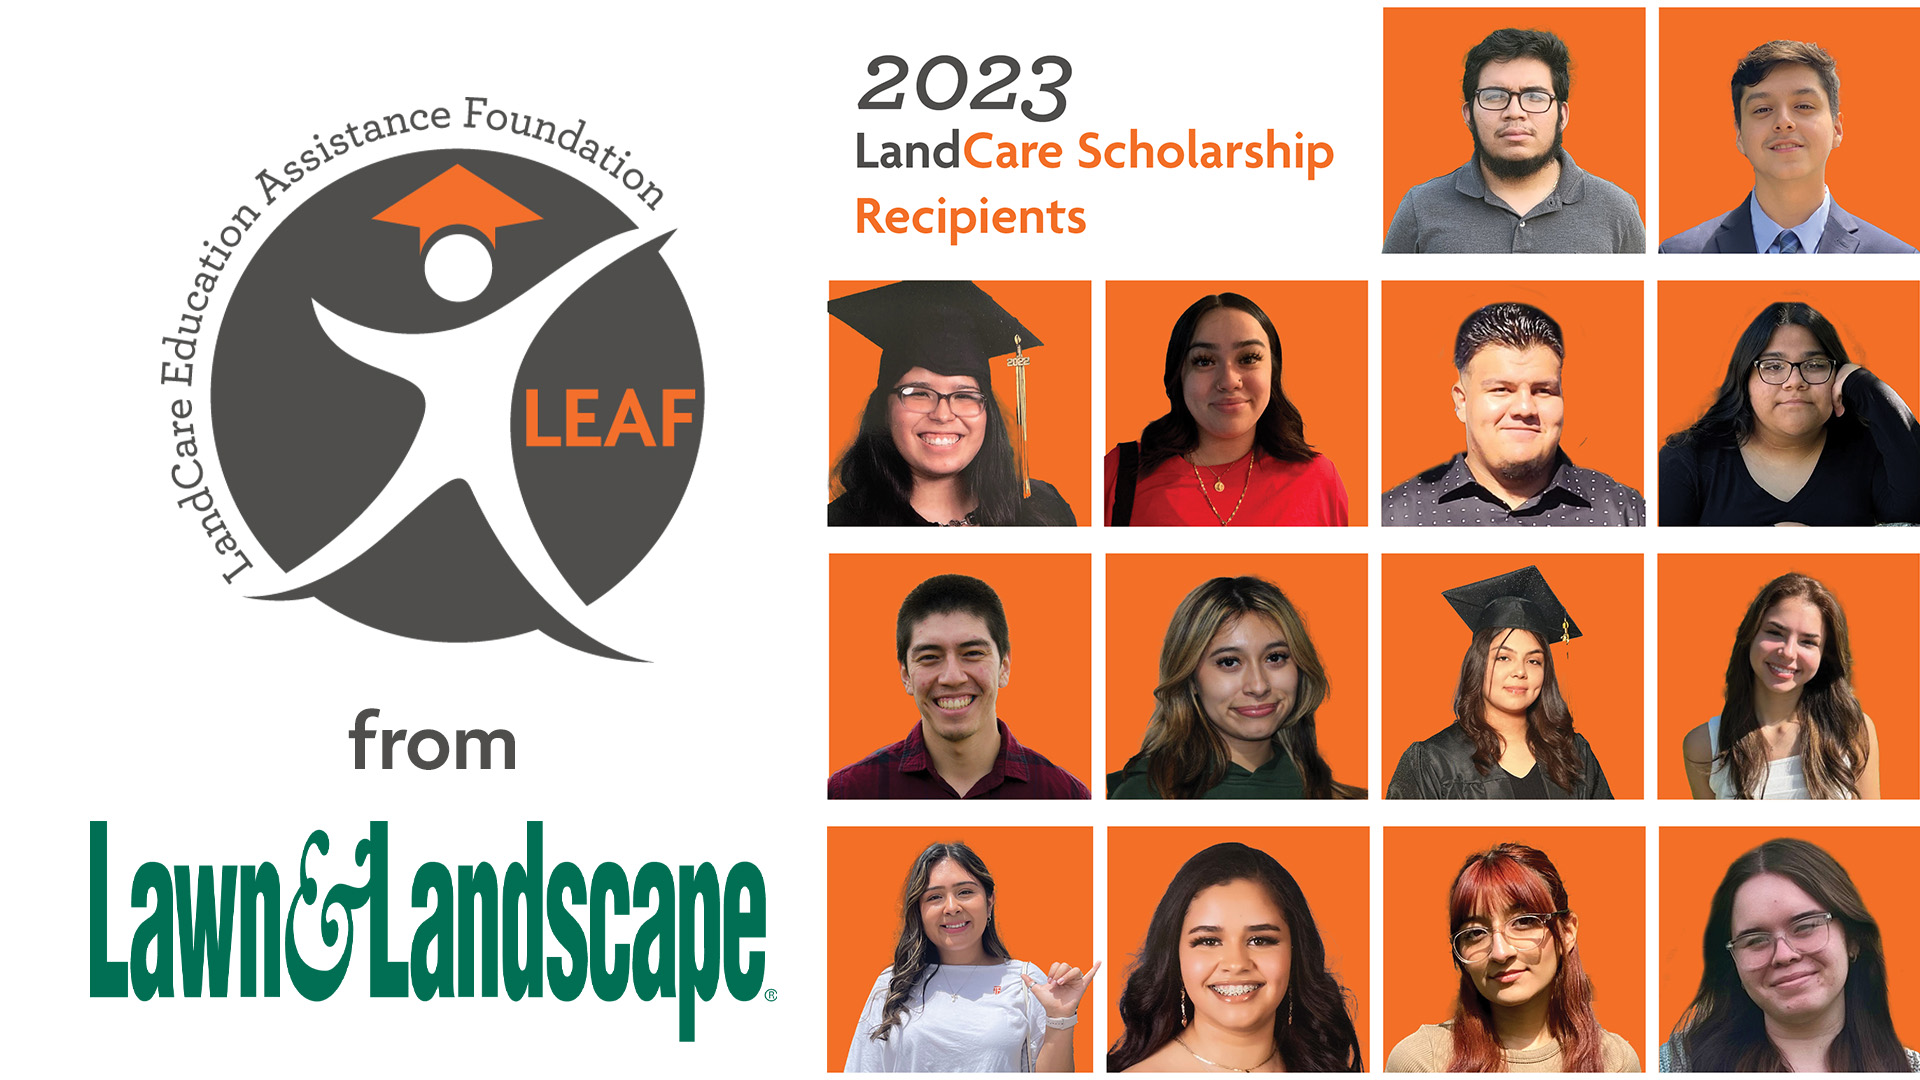 LEAF grants 14 scholarships to first-generation college students